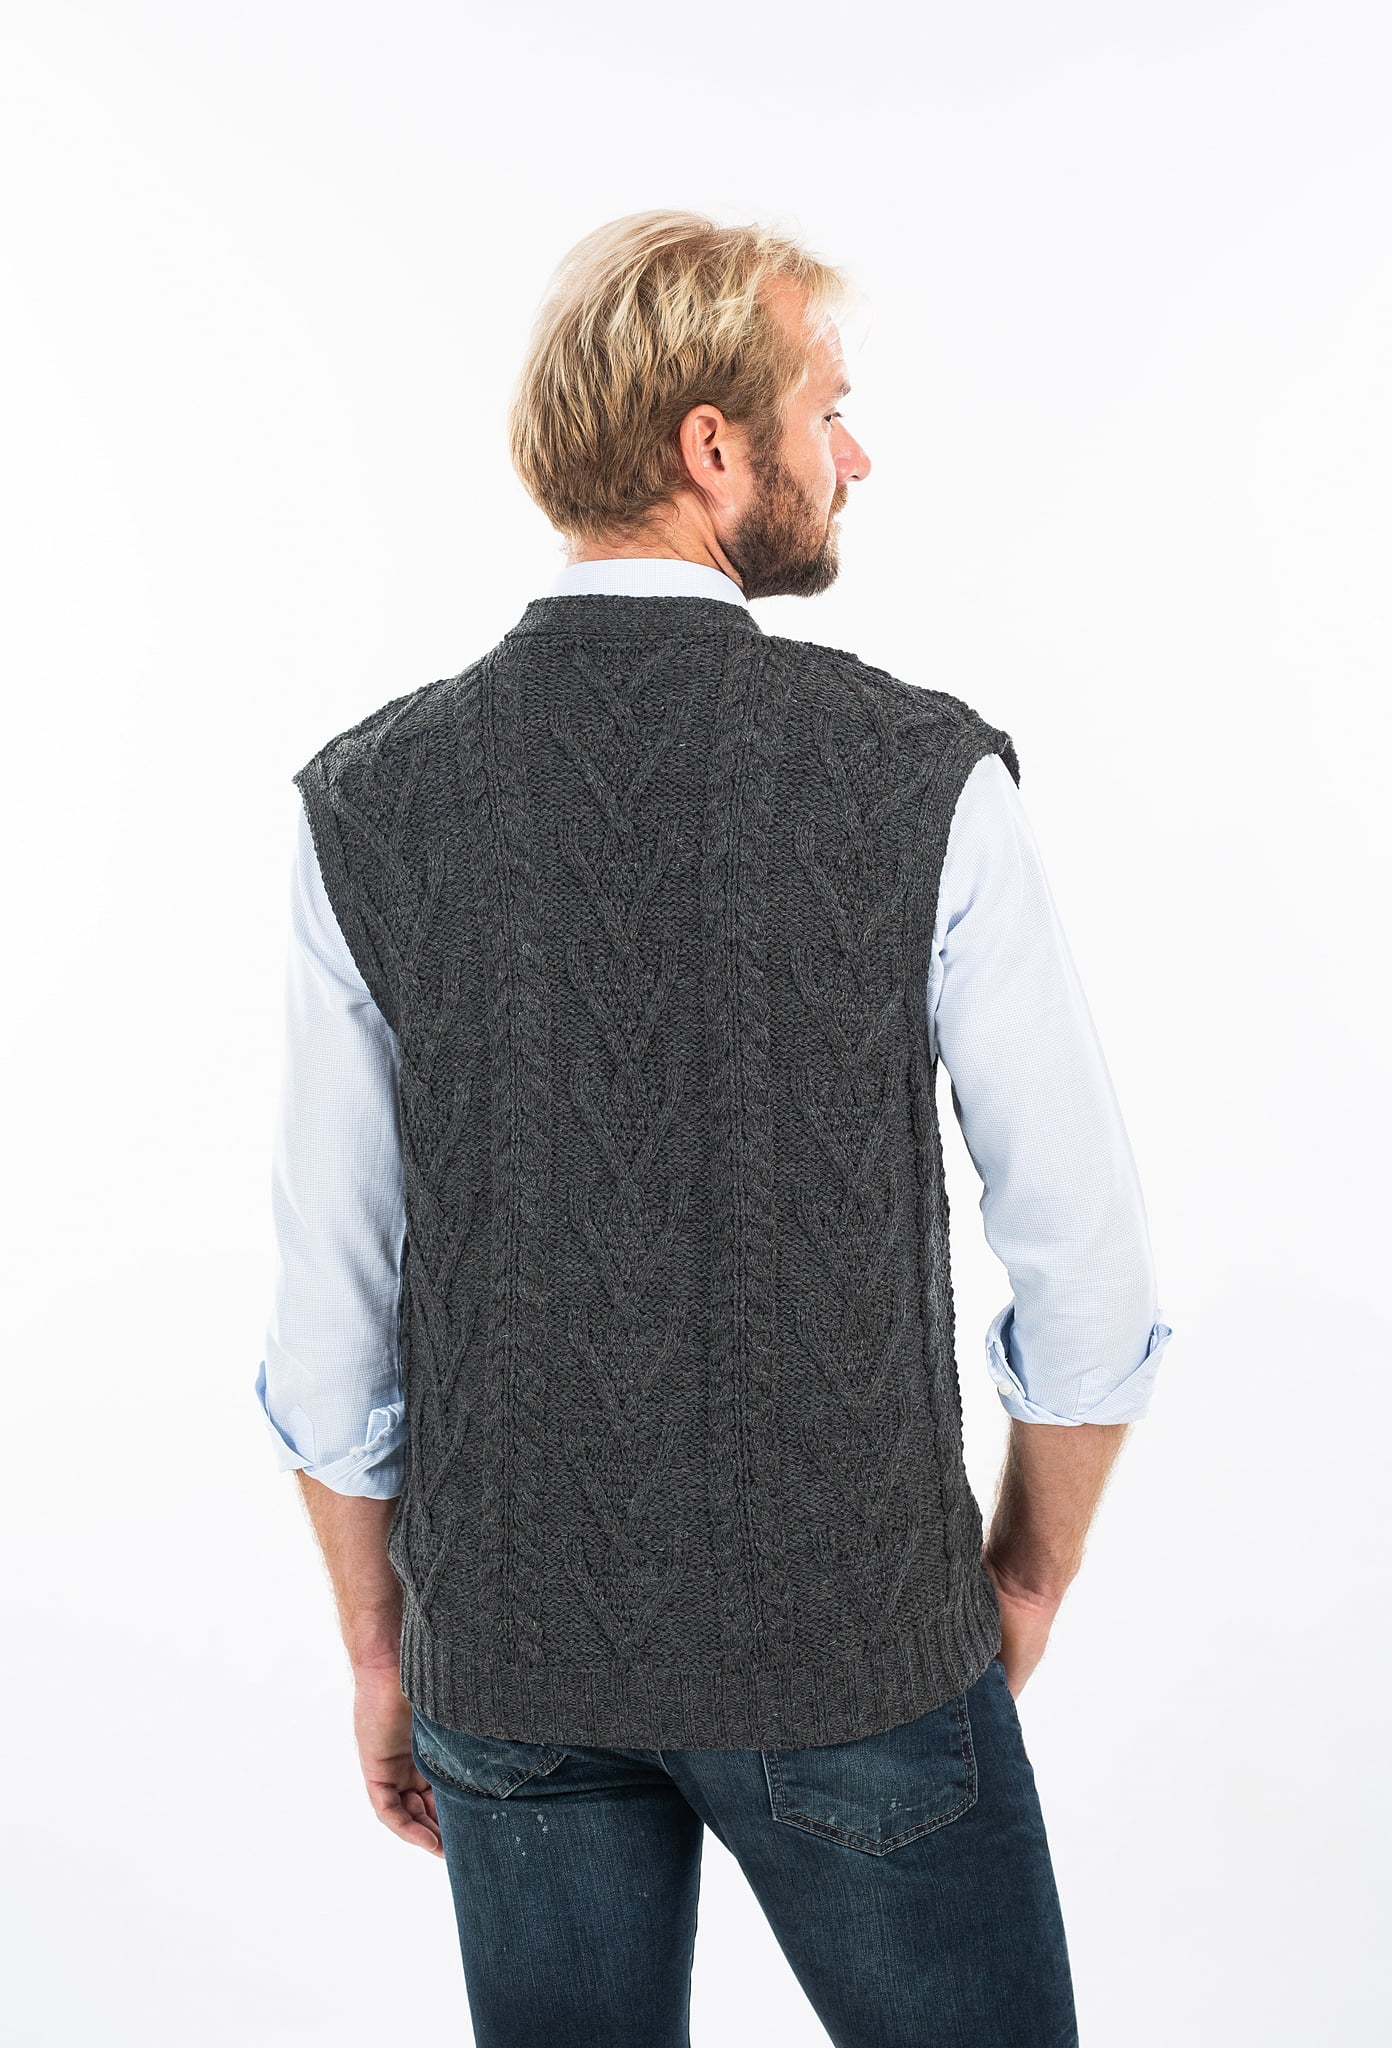 SAOL Men's 100% Merino Wool Sweater Vest Aran Irish V-Neck Cable Knit  Sleeveless Cardigan with Buttons and Pockets 